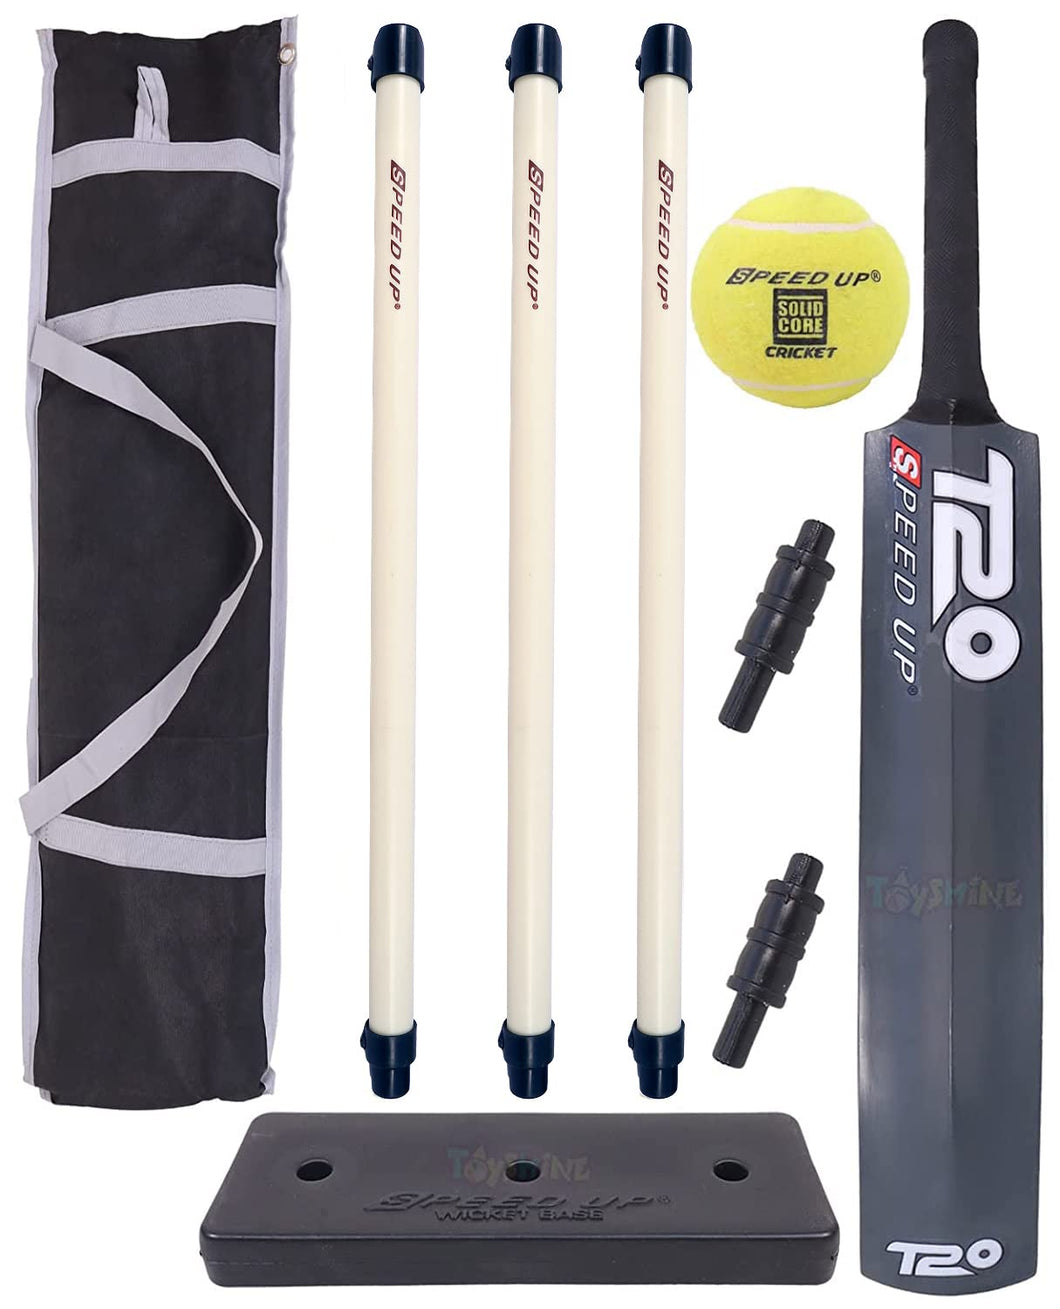 Toyshine Speed Up T-20 Combo Box Cricket Kit for Kids (Bat Size: 6, 6-12 yrs) Outdoor Sports Toy Gift for Boys Girls Picnic Fun - SSTP (Grey)